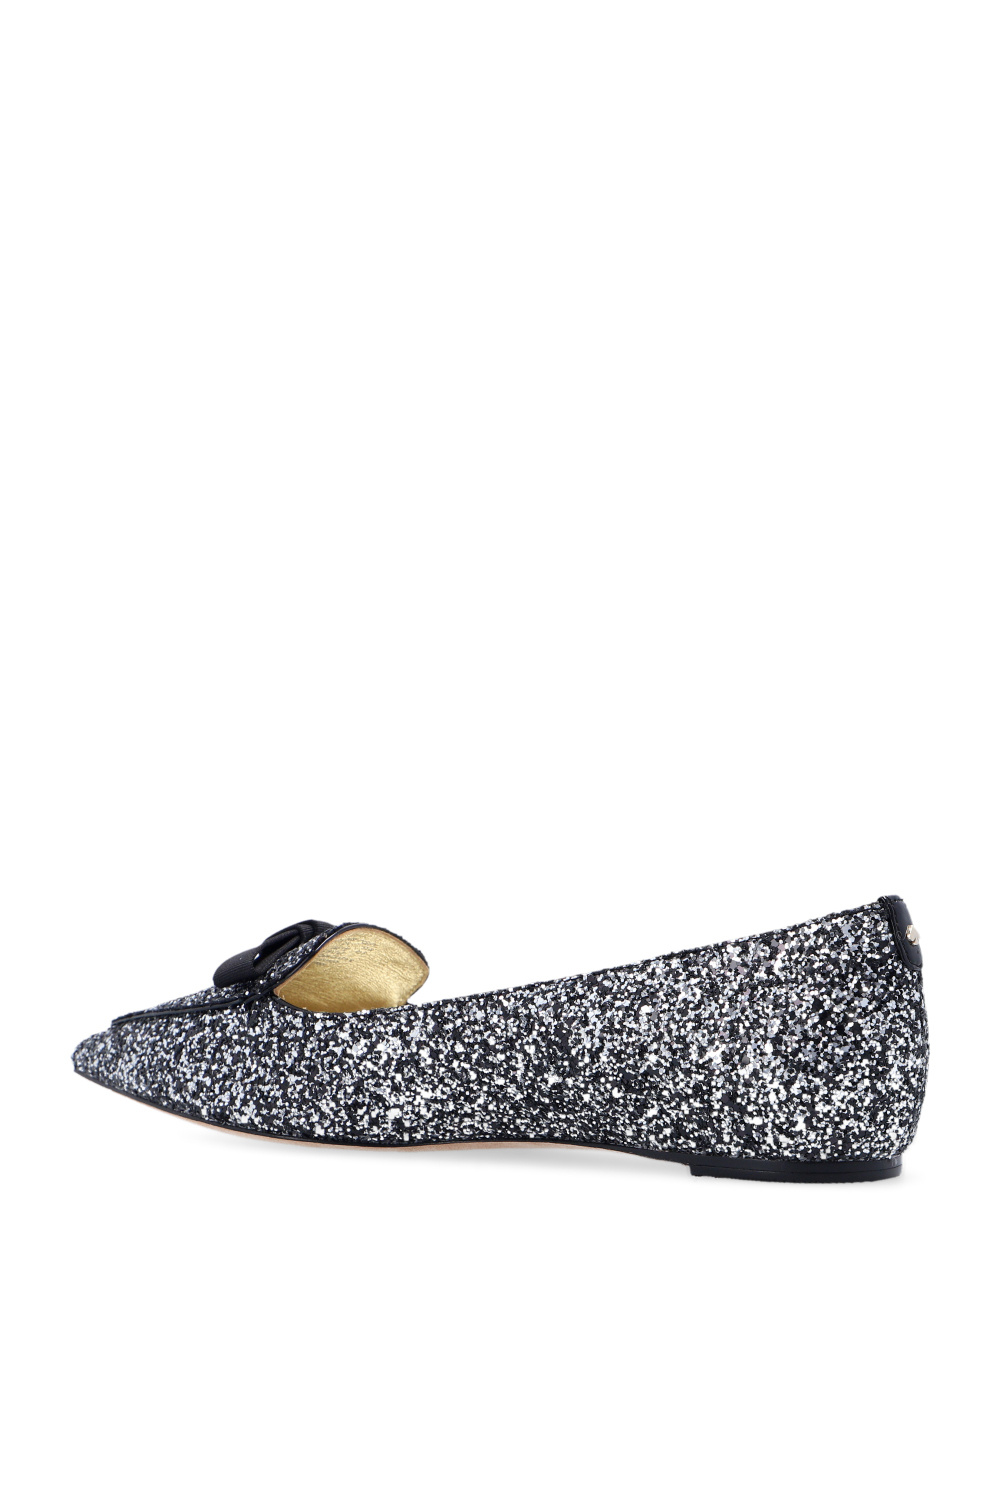 Kate Spade ‘Poppy’ ballet flats with bow